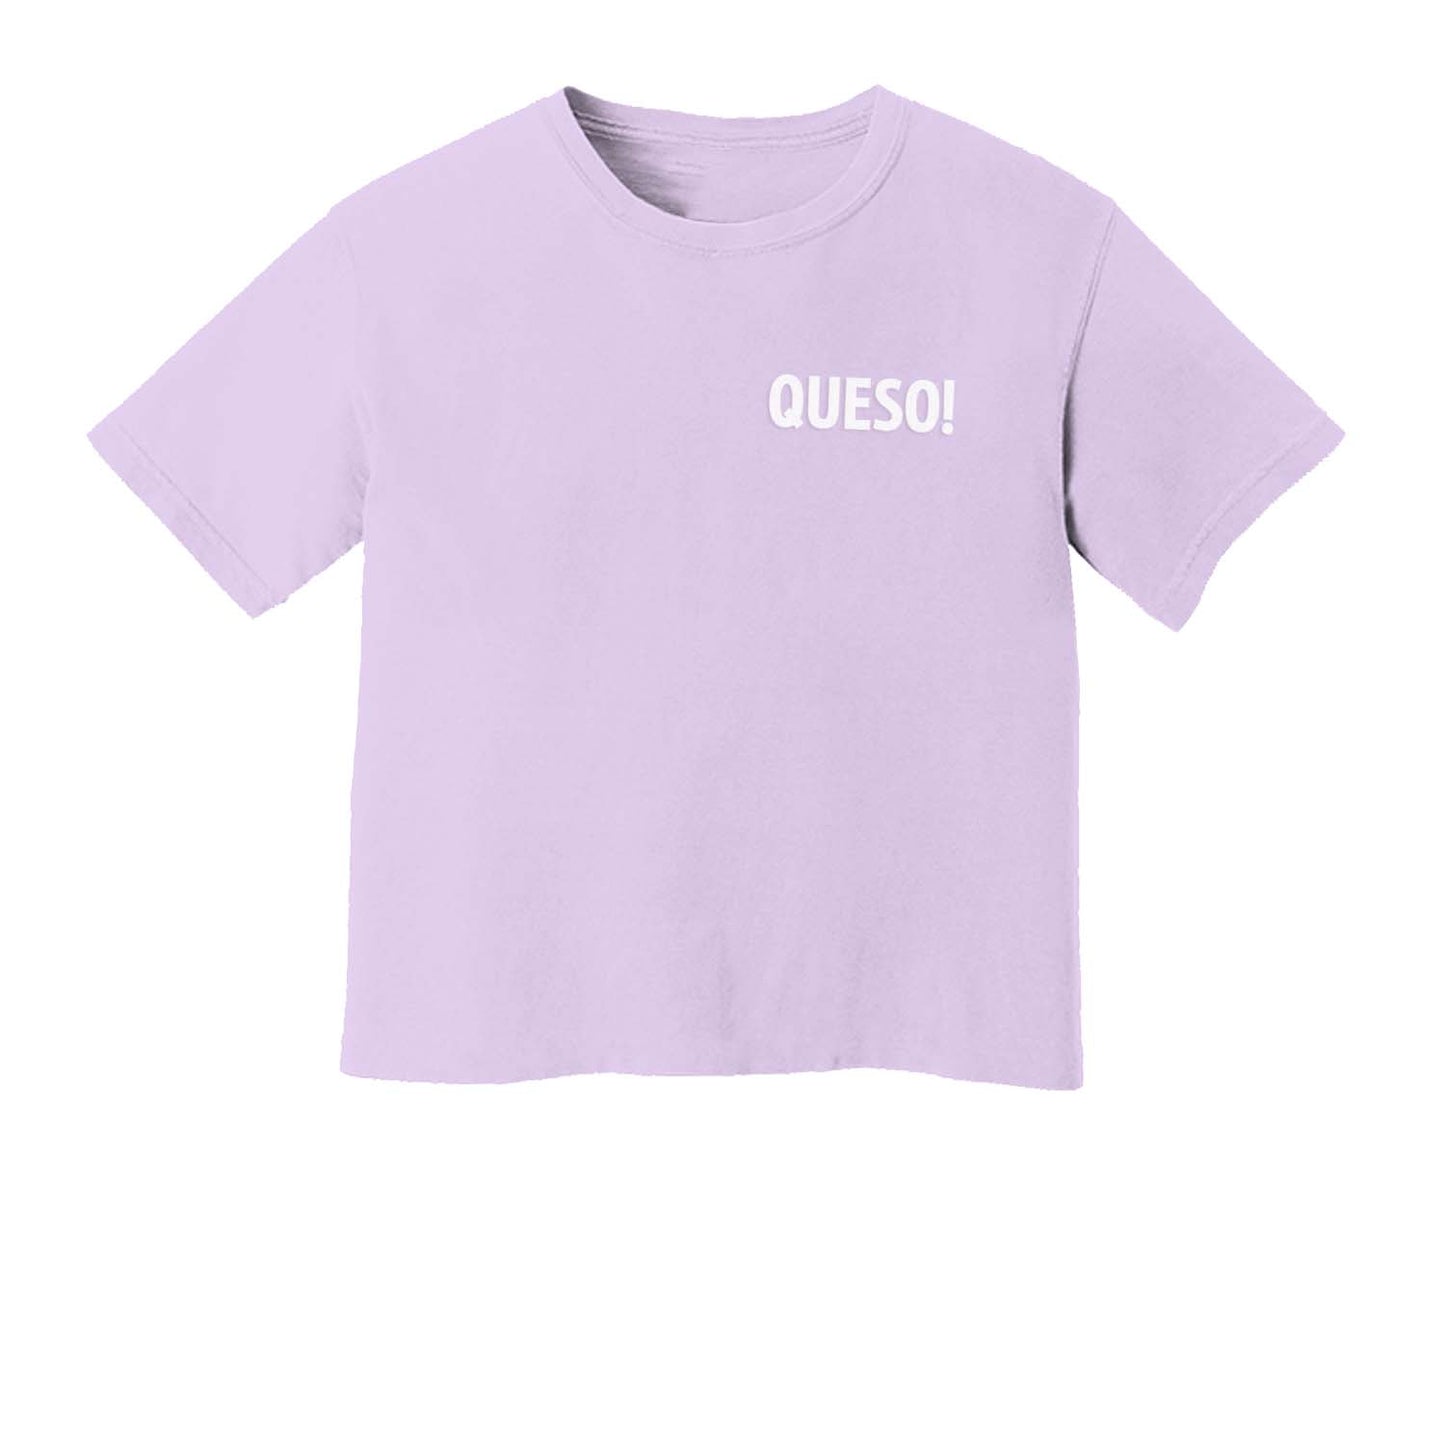 Queso! Washed Crop Tee